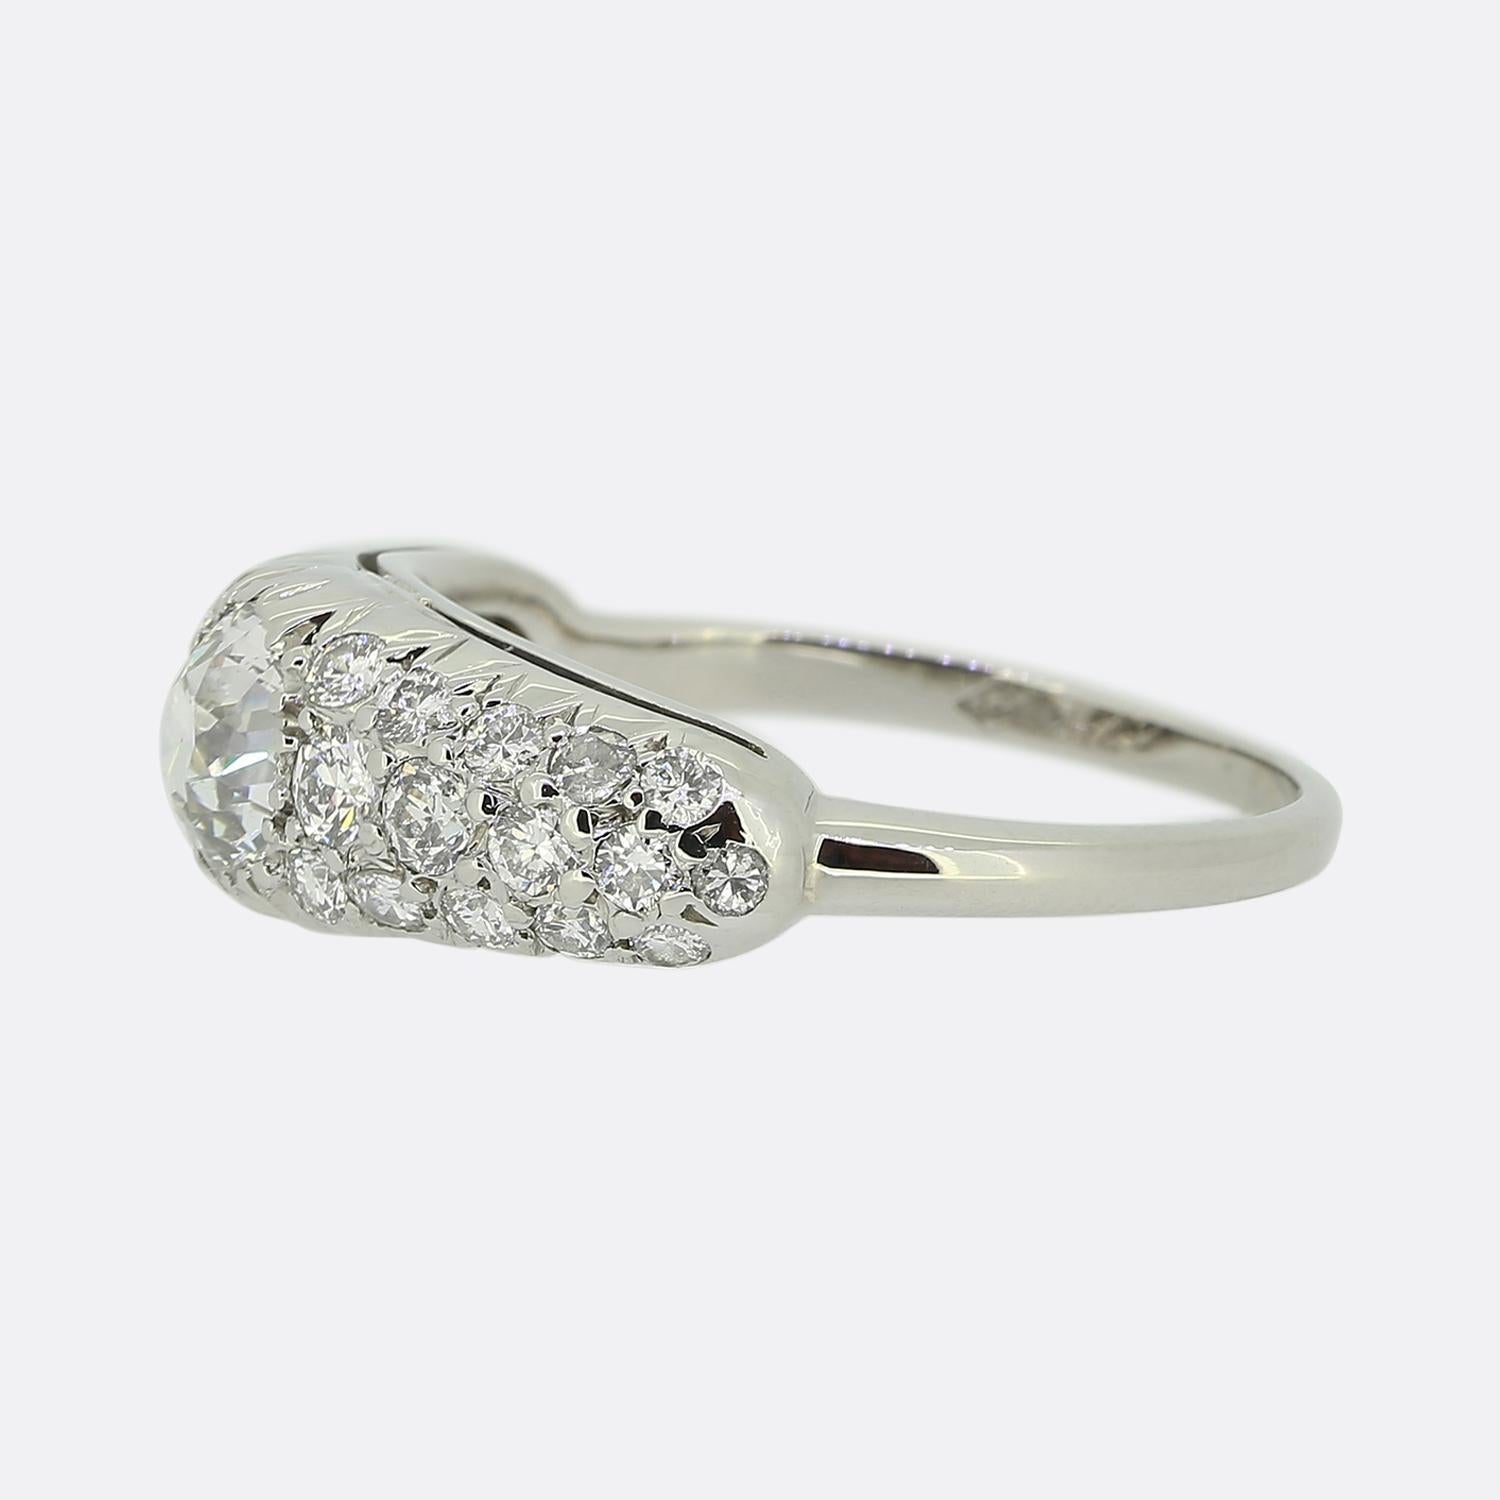 Here we have a stunning diamond cluster ring crafted at a time when the Art Deco style was at the forefront of design. This piece has been crafted from 14ct white gold and showcases a single round faceted old mine cut diamond which sits slightly